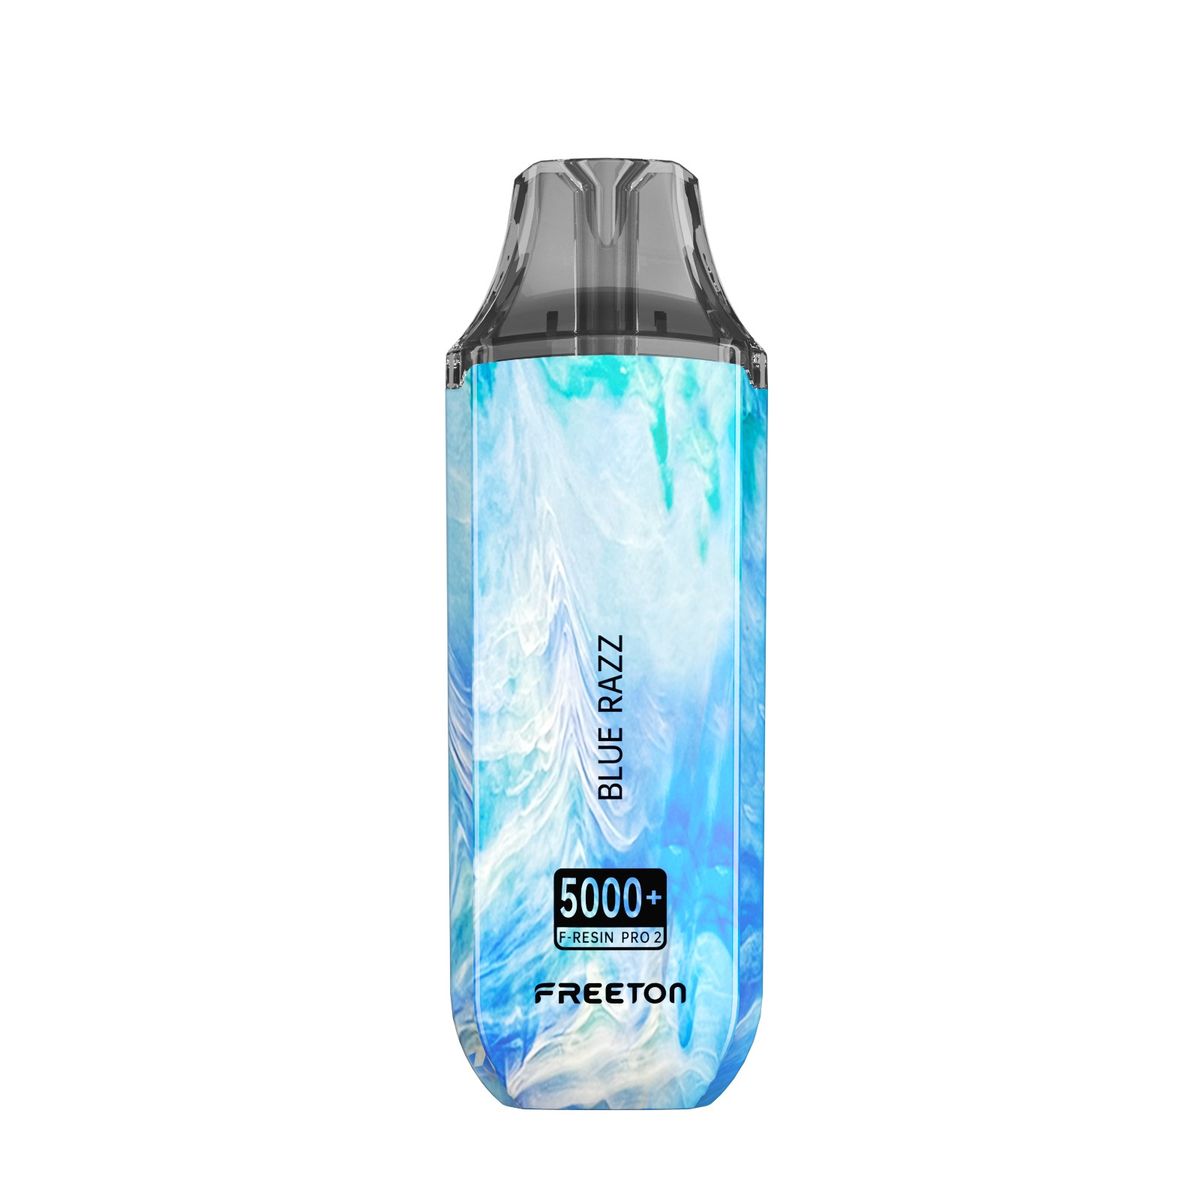 Freeton - F-Resin Pro 2 Rechargeable Disposable Vape 5000 - Blue Razz, Shop Today. Get it Tomorrow!